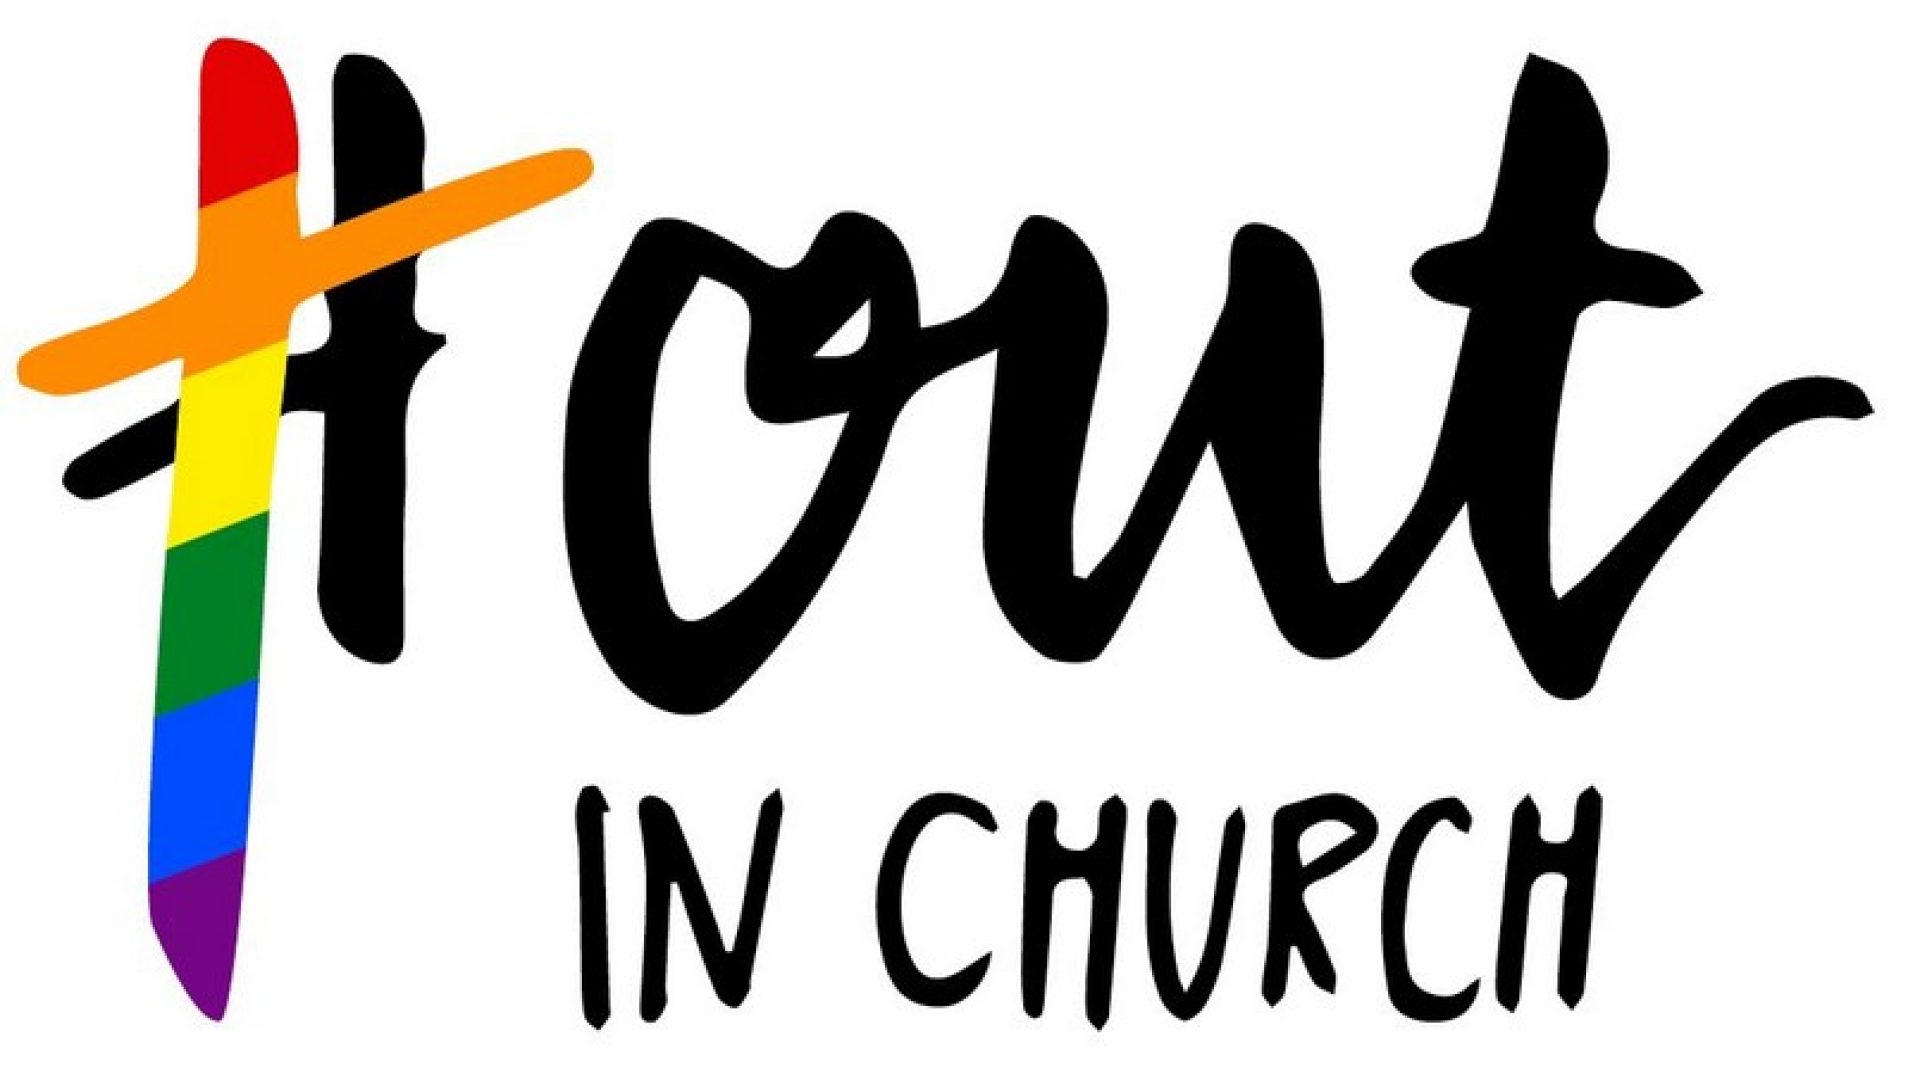 Out-in-church – experiences of LGBTQ Christians  in Germany